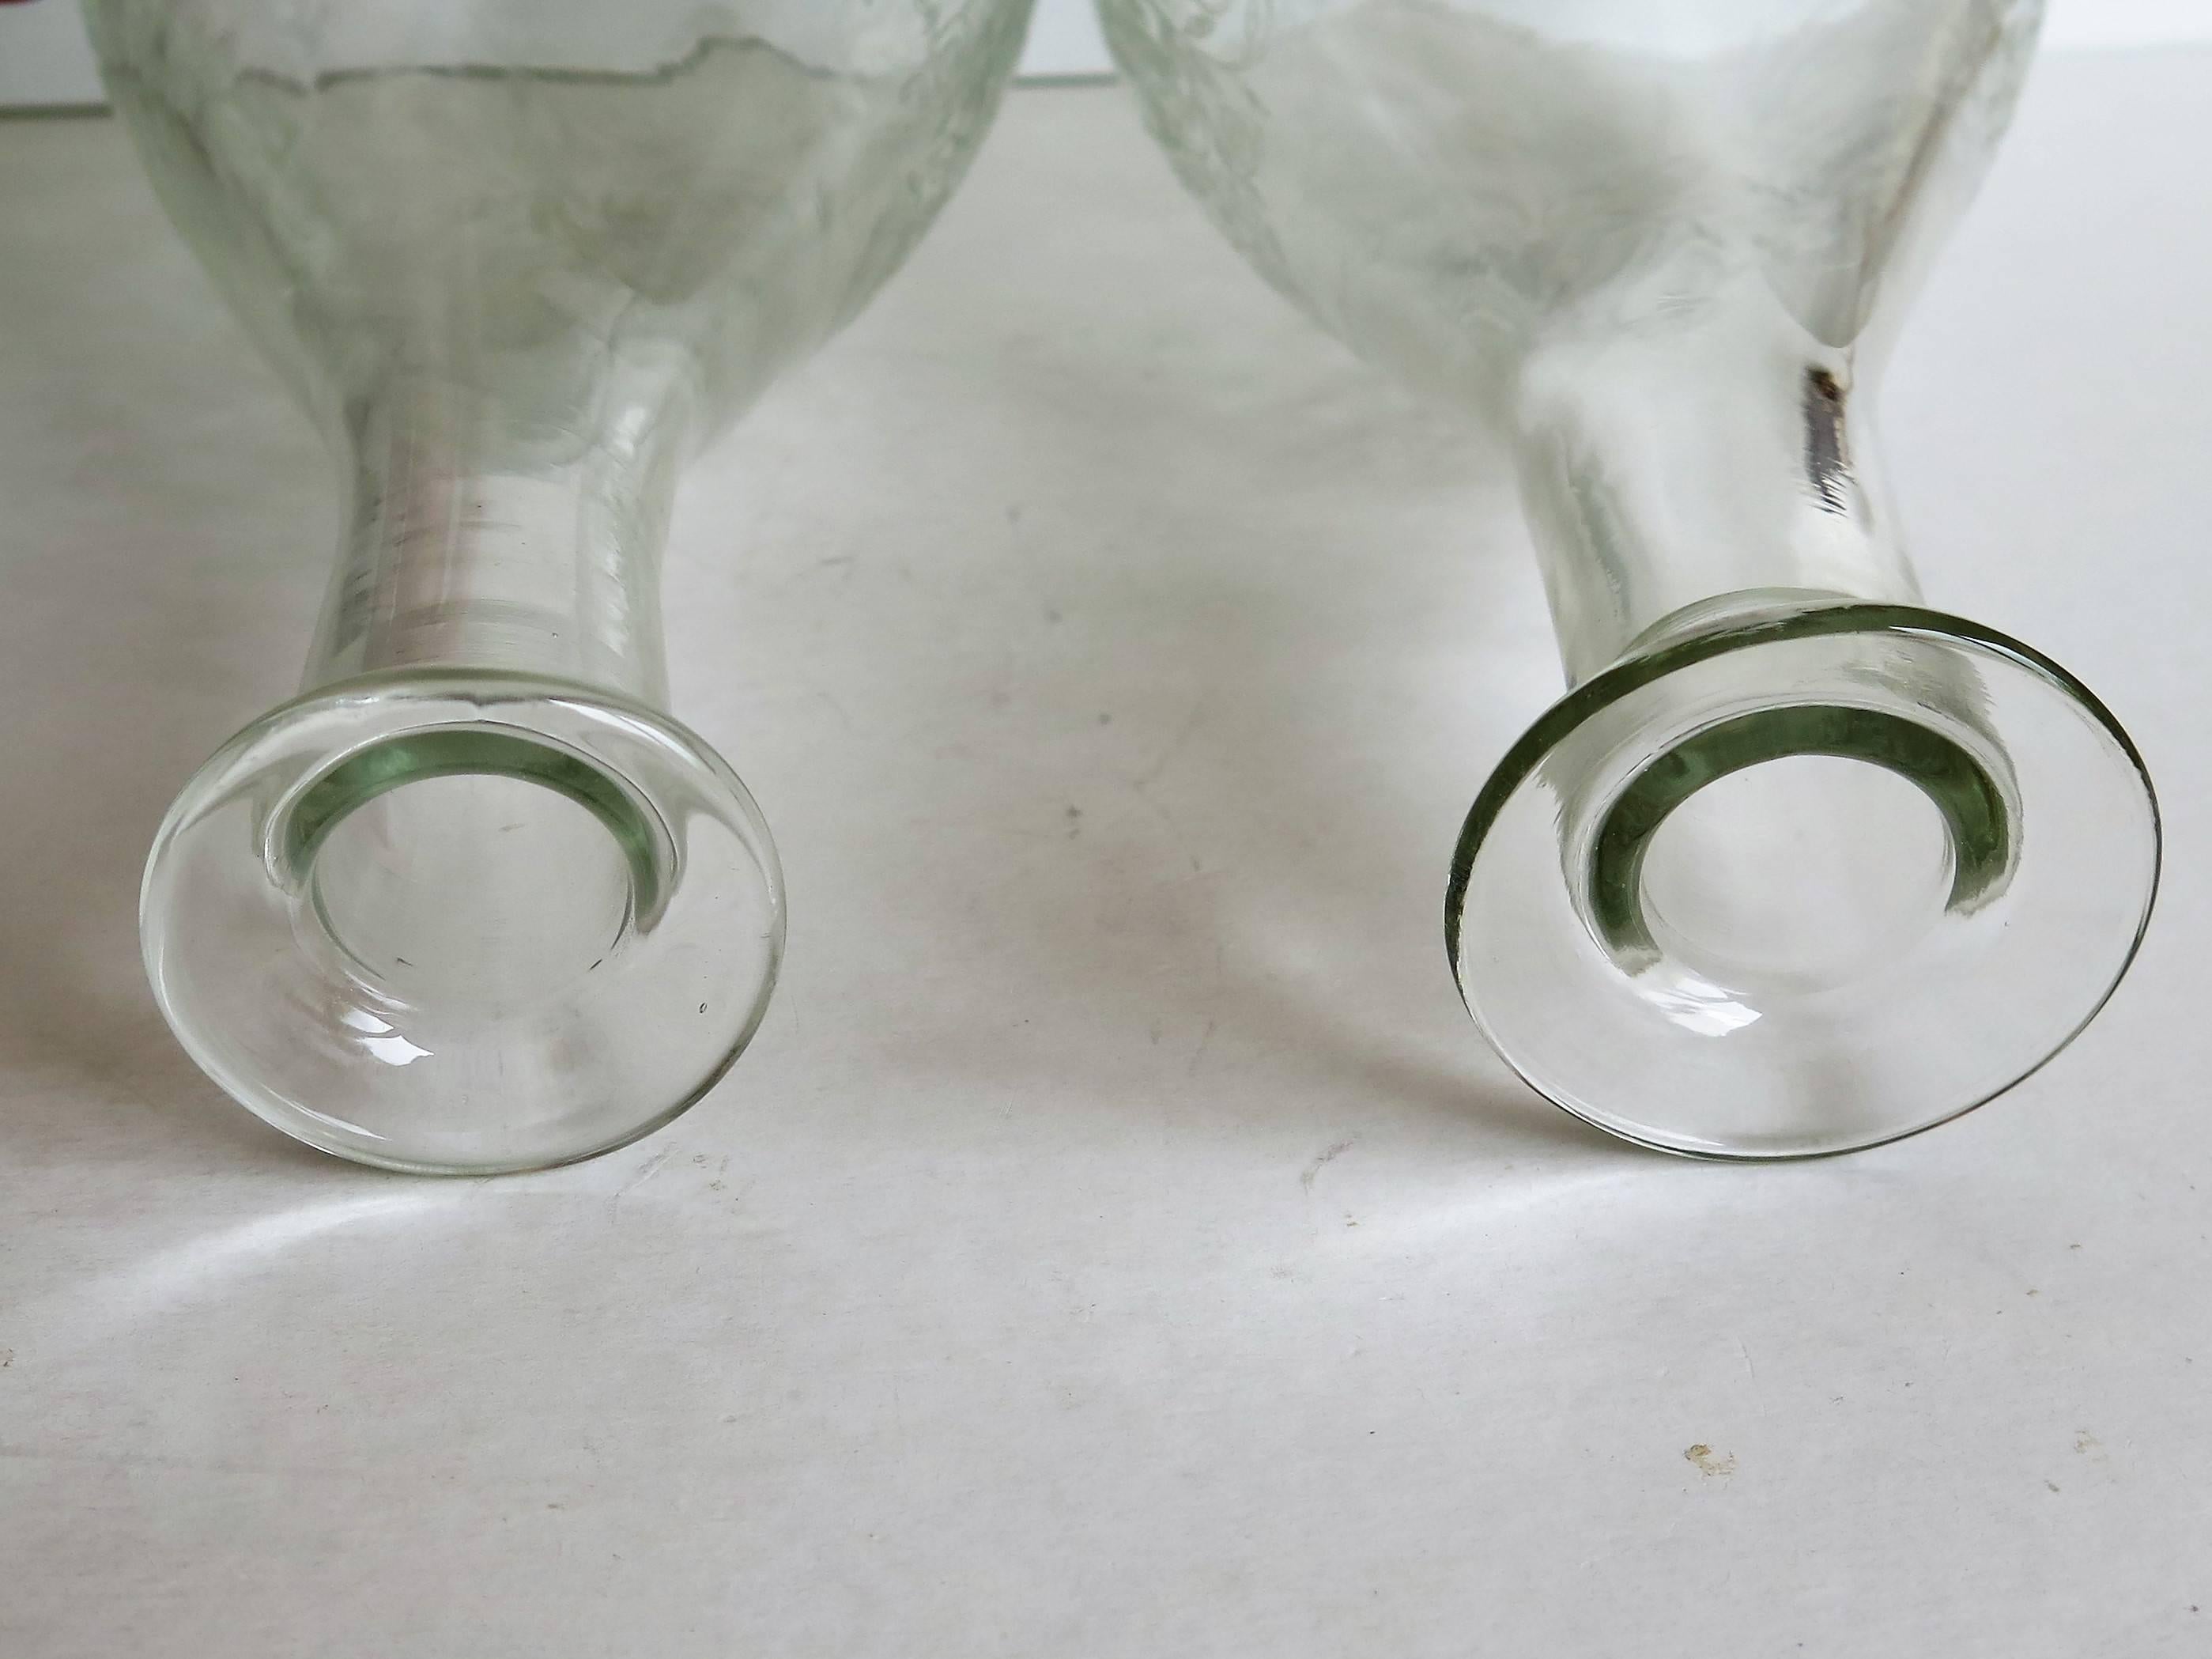 Fine Pair of Glass Carafes, Jugs or Vases Hand-blown and engraved, Late 19th C. 2